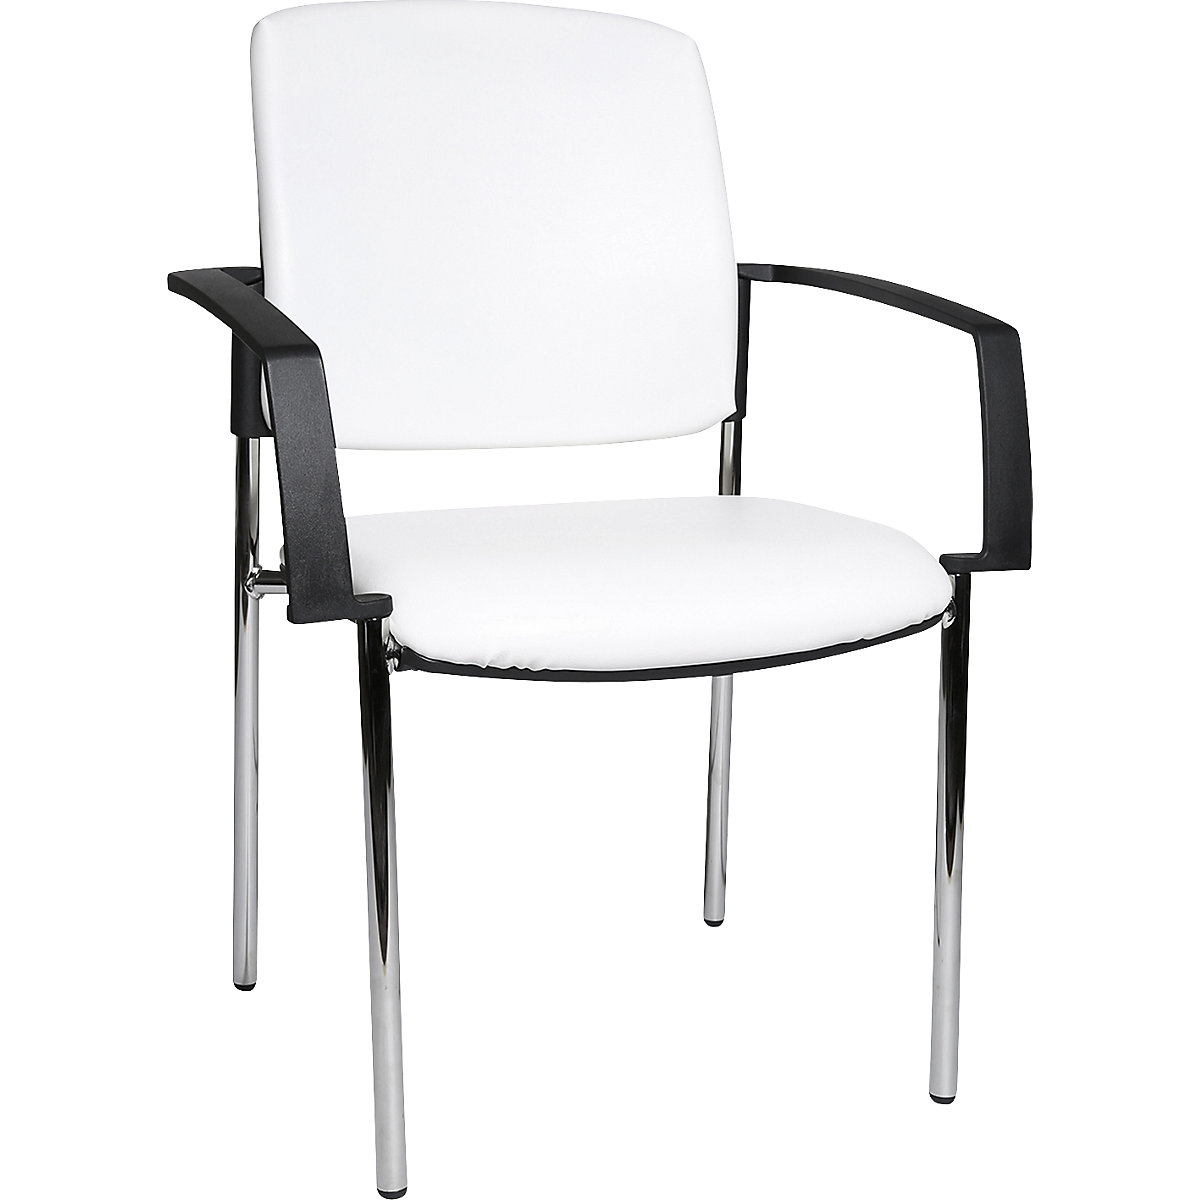 Topstar – Visitors' chairs with arm rests, pack of 2, vinyl cover, white